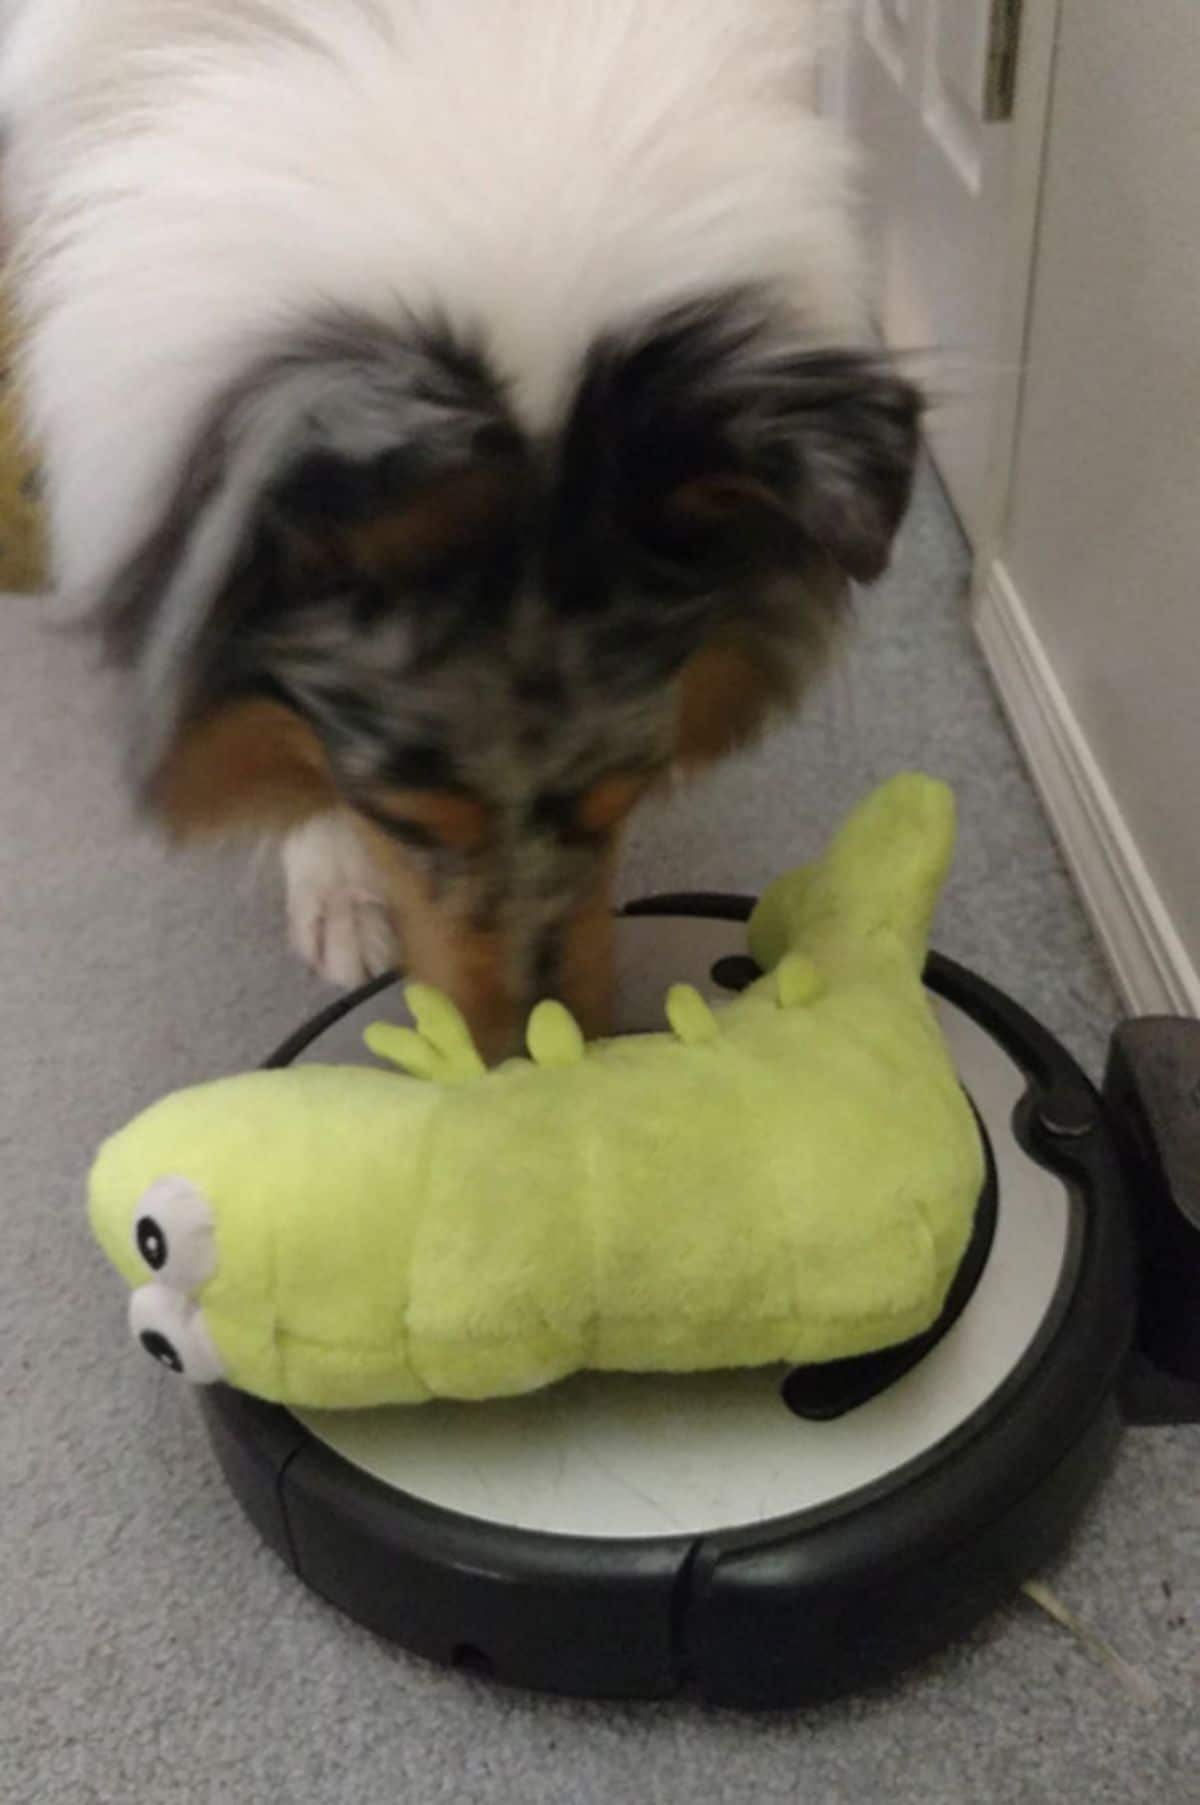 fluffy white black and orange collie placing a green catepillar stuffed toy on a black and white roomba